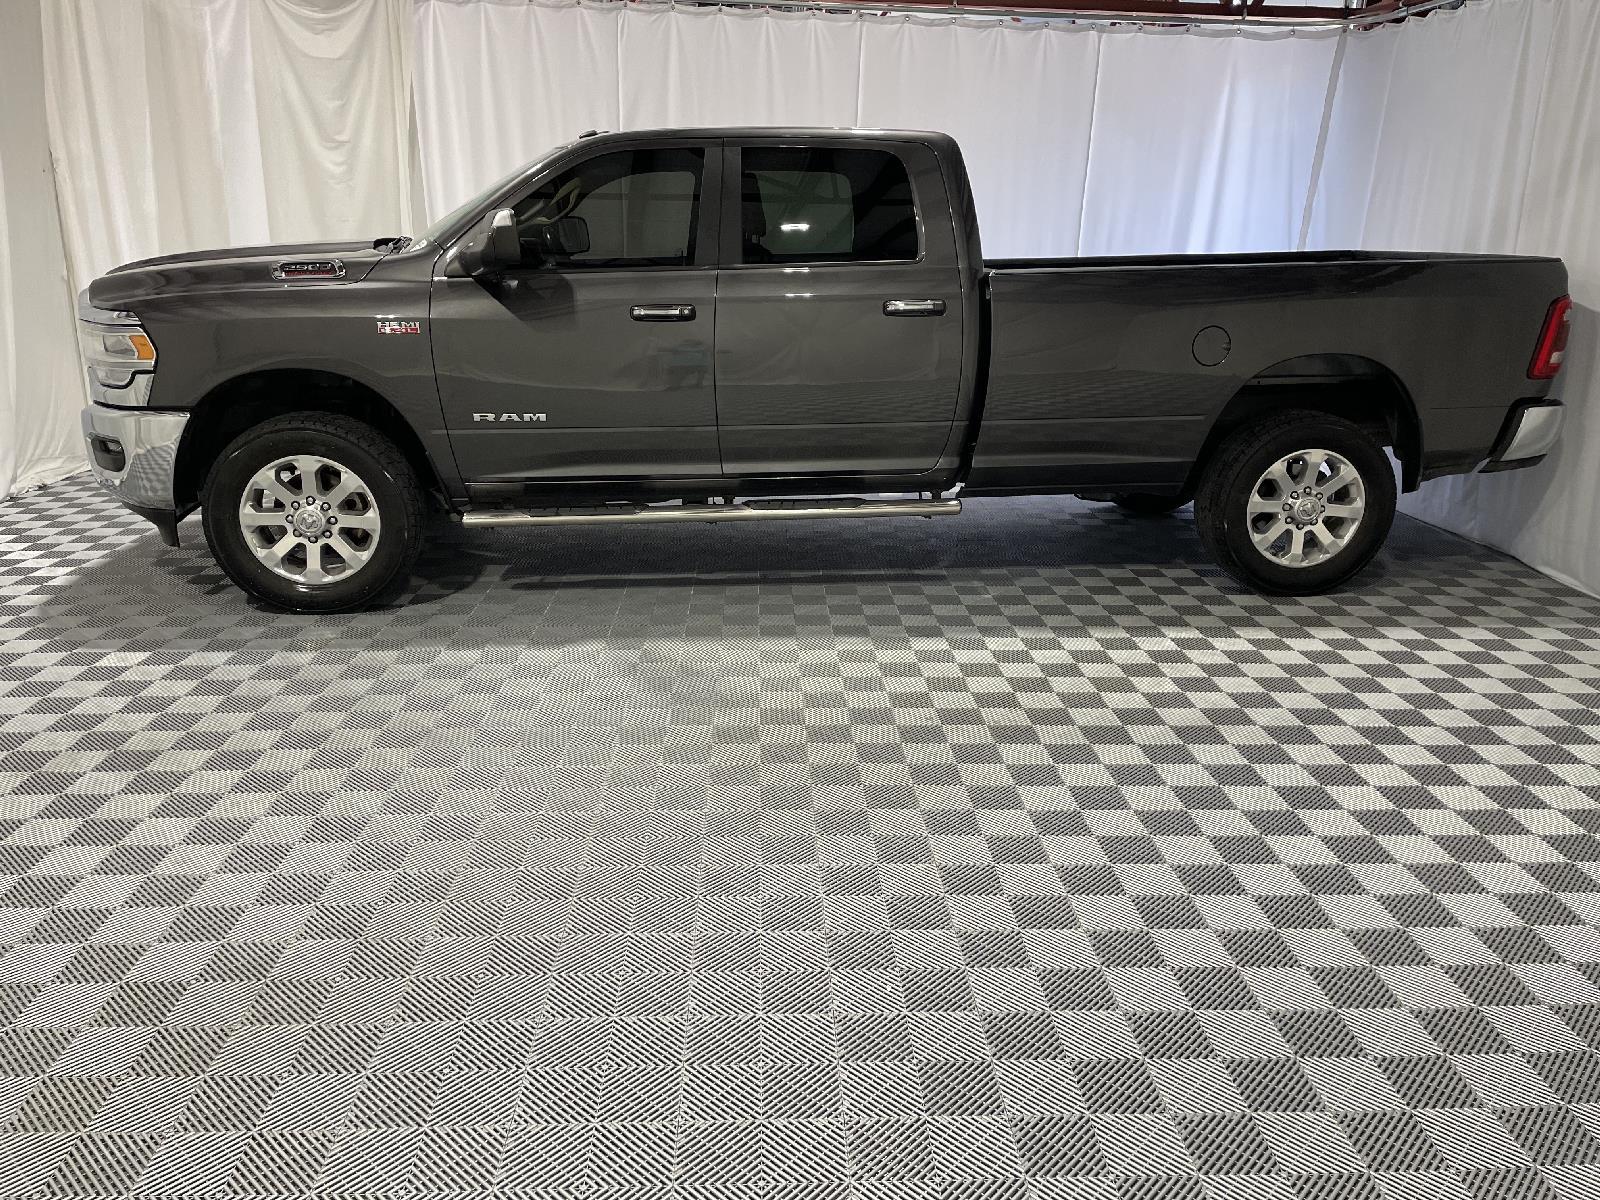 Used 2019 Ram 2500 Big Horn Crew Cab Truck for sale in St Joseph MO